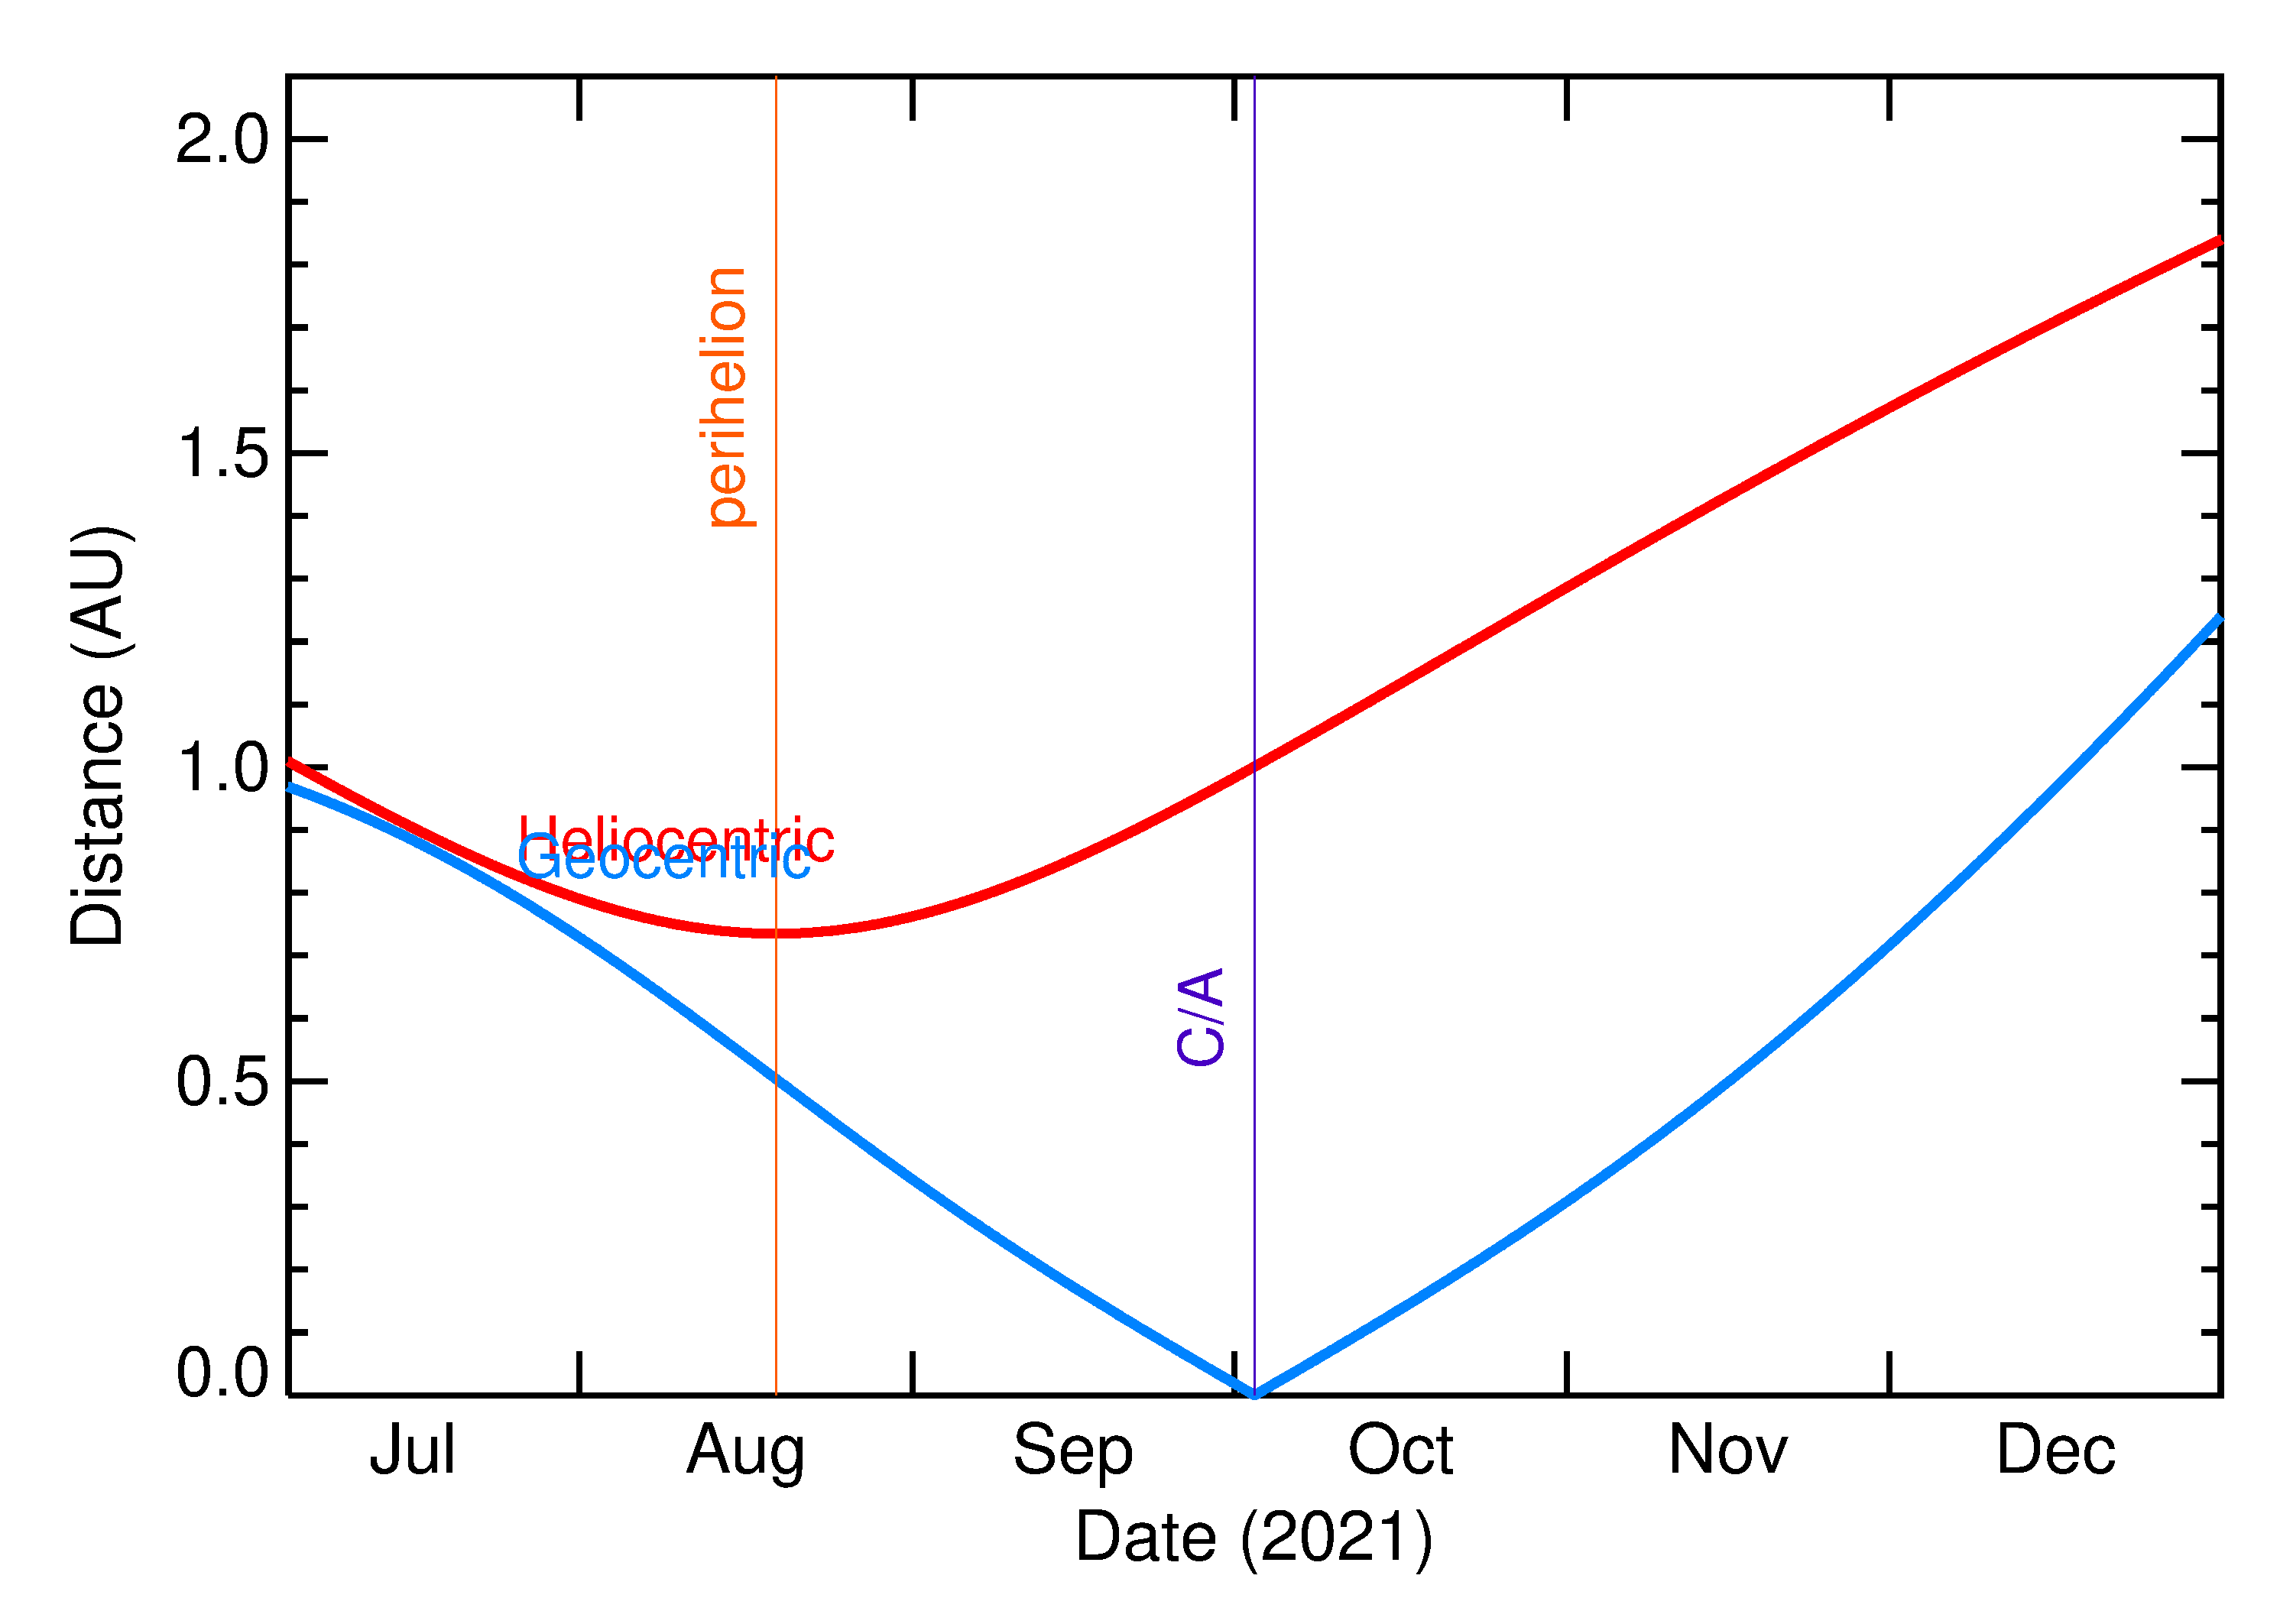 Heliocentric and Geocentric Distances of 2021 TX in the months around closest approach